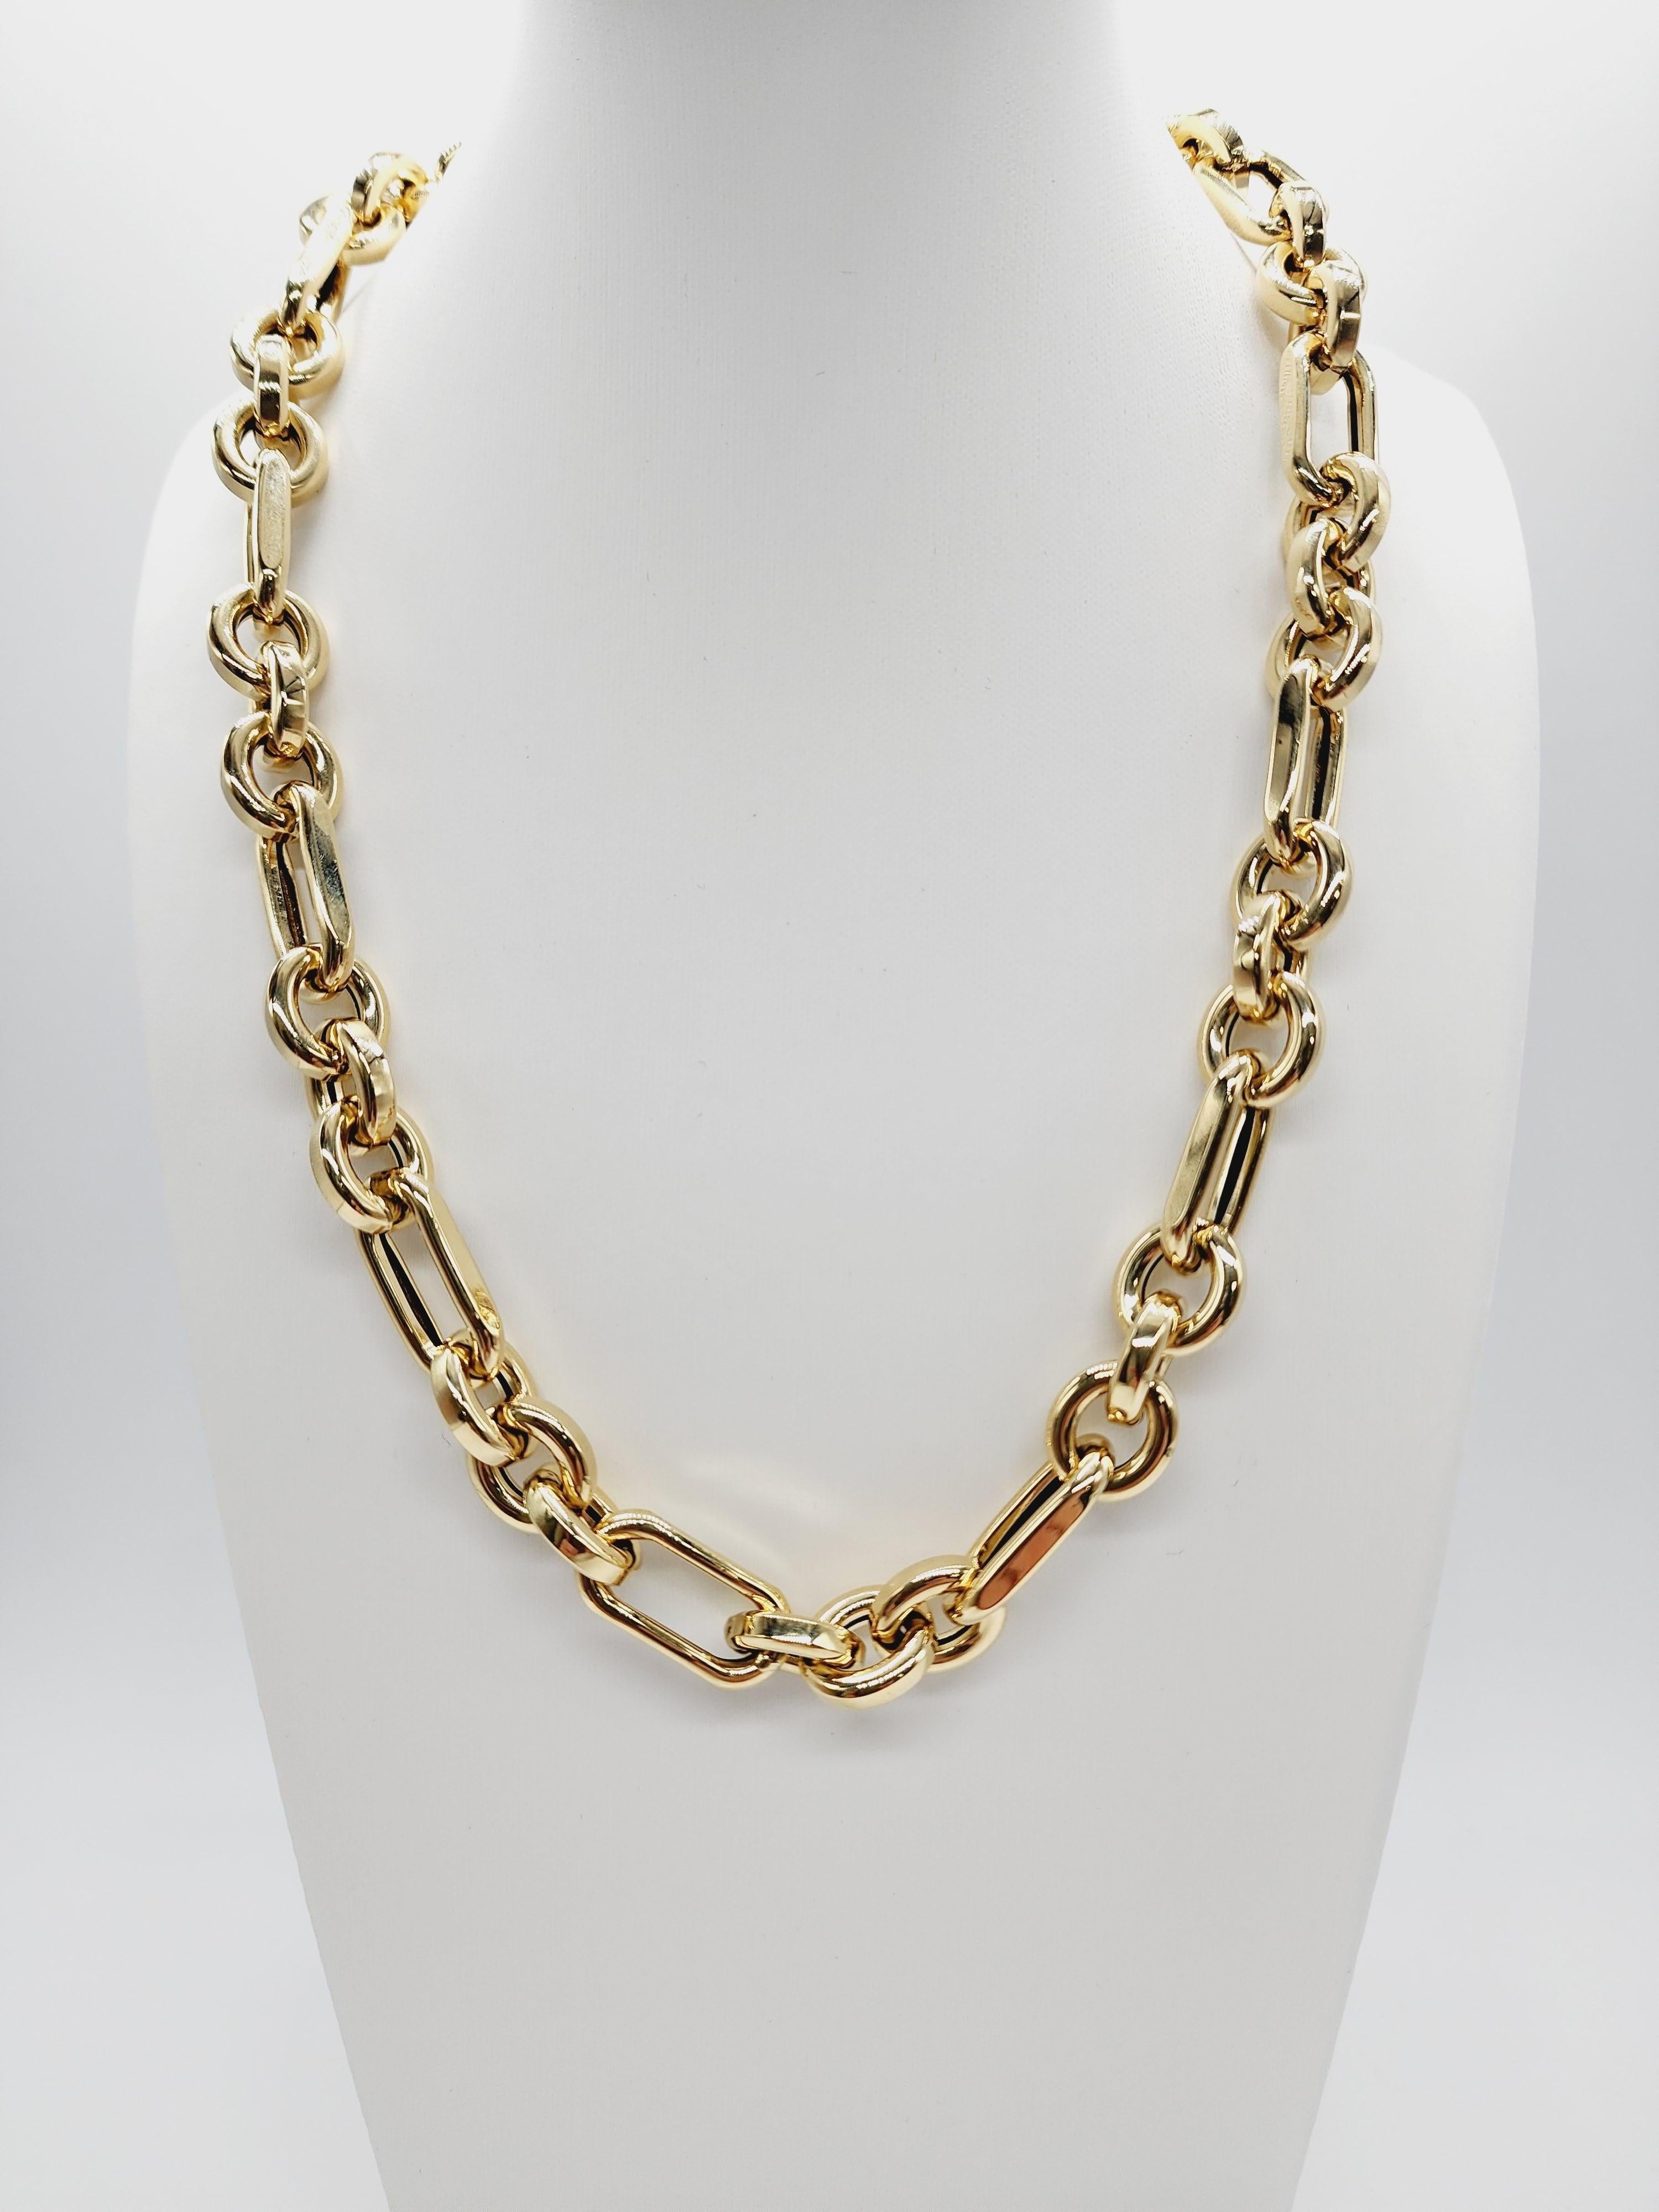 Italian made designer 18k gold extra large/thick box cable link chain necklace in yellow gold. A modern, edgy, and timeless necklace chain.

Links: Approx. 10 mm wide
Weight: 20'' length is approx. 31 grams
Hollow Yellow Chain 18K Yellow Gold.